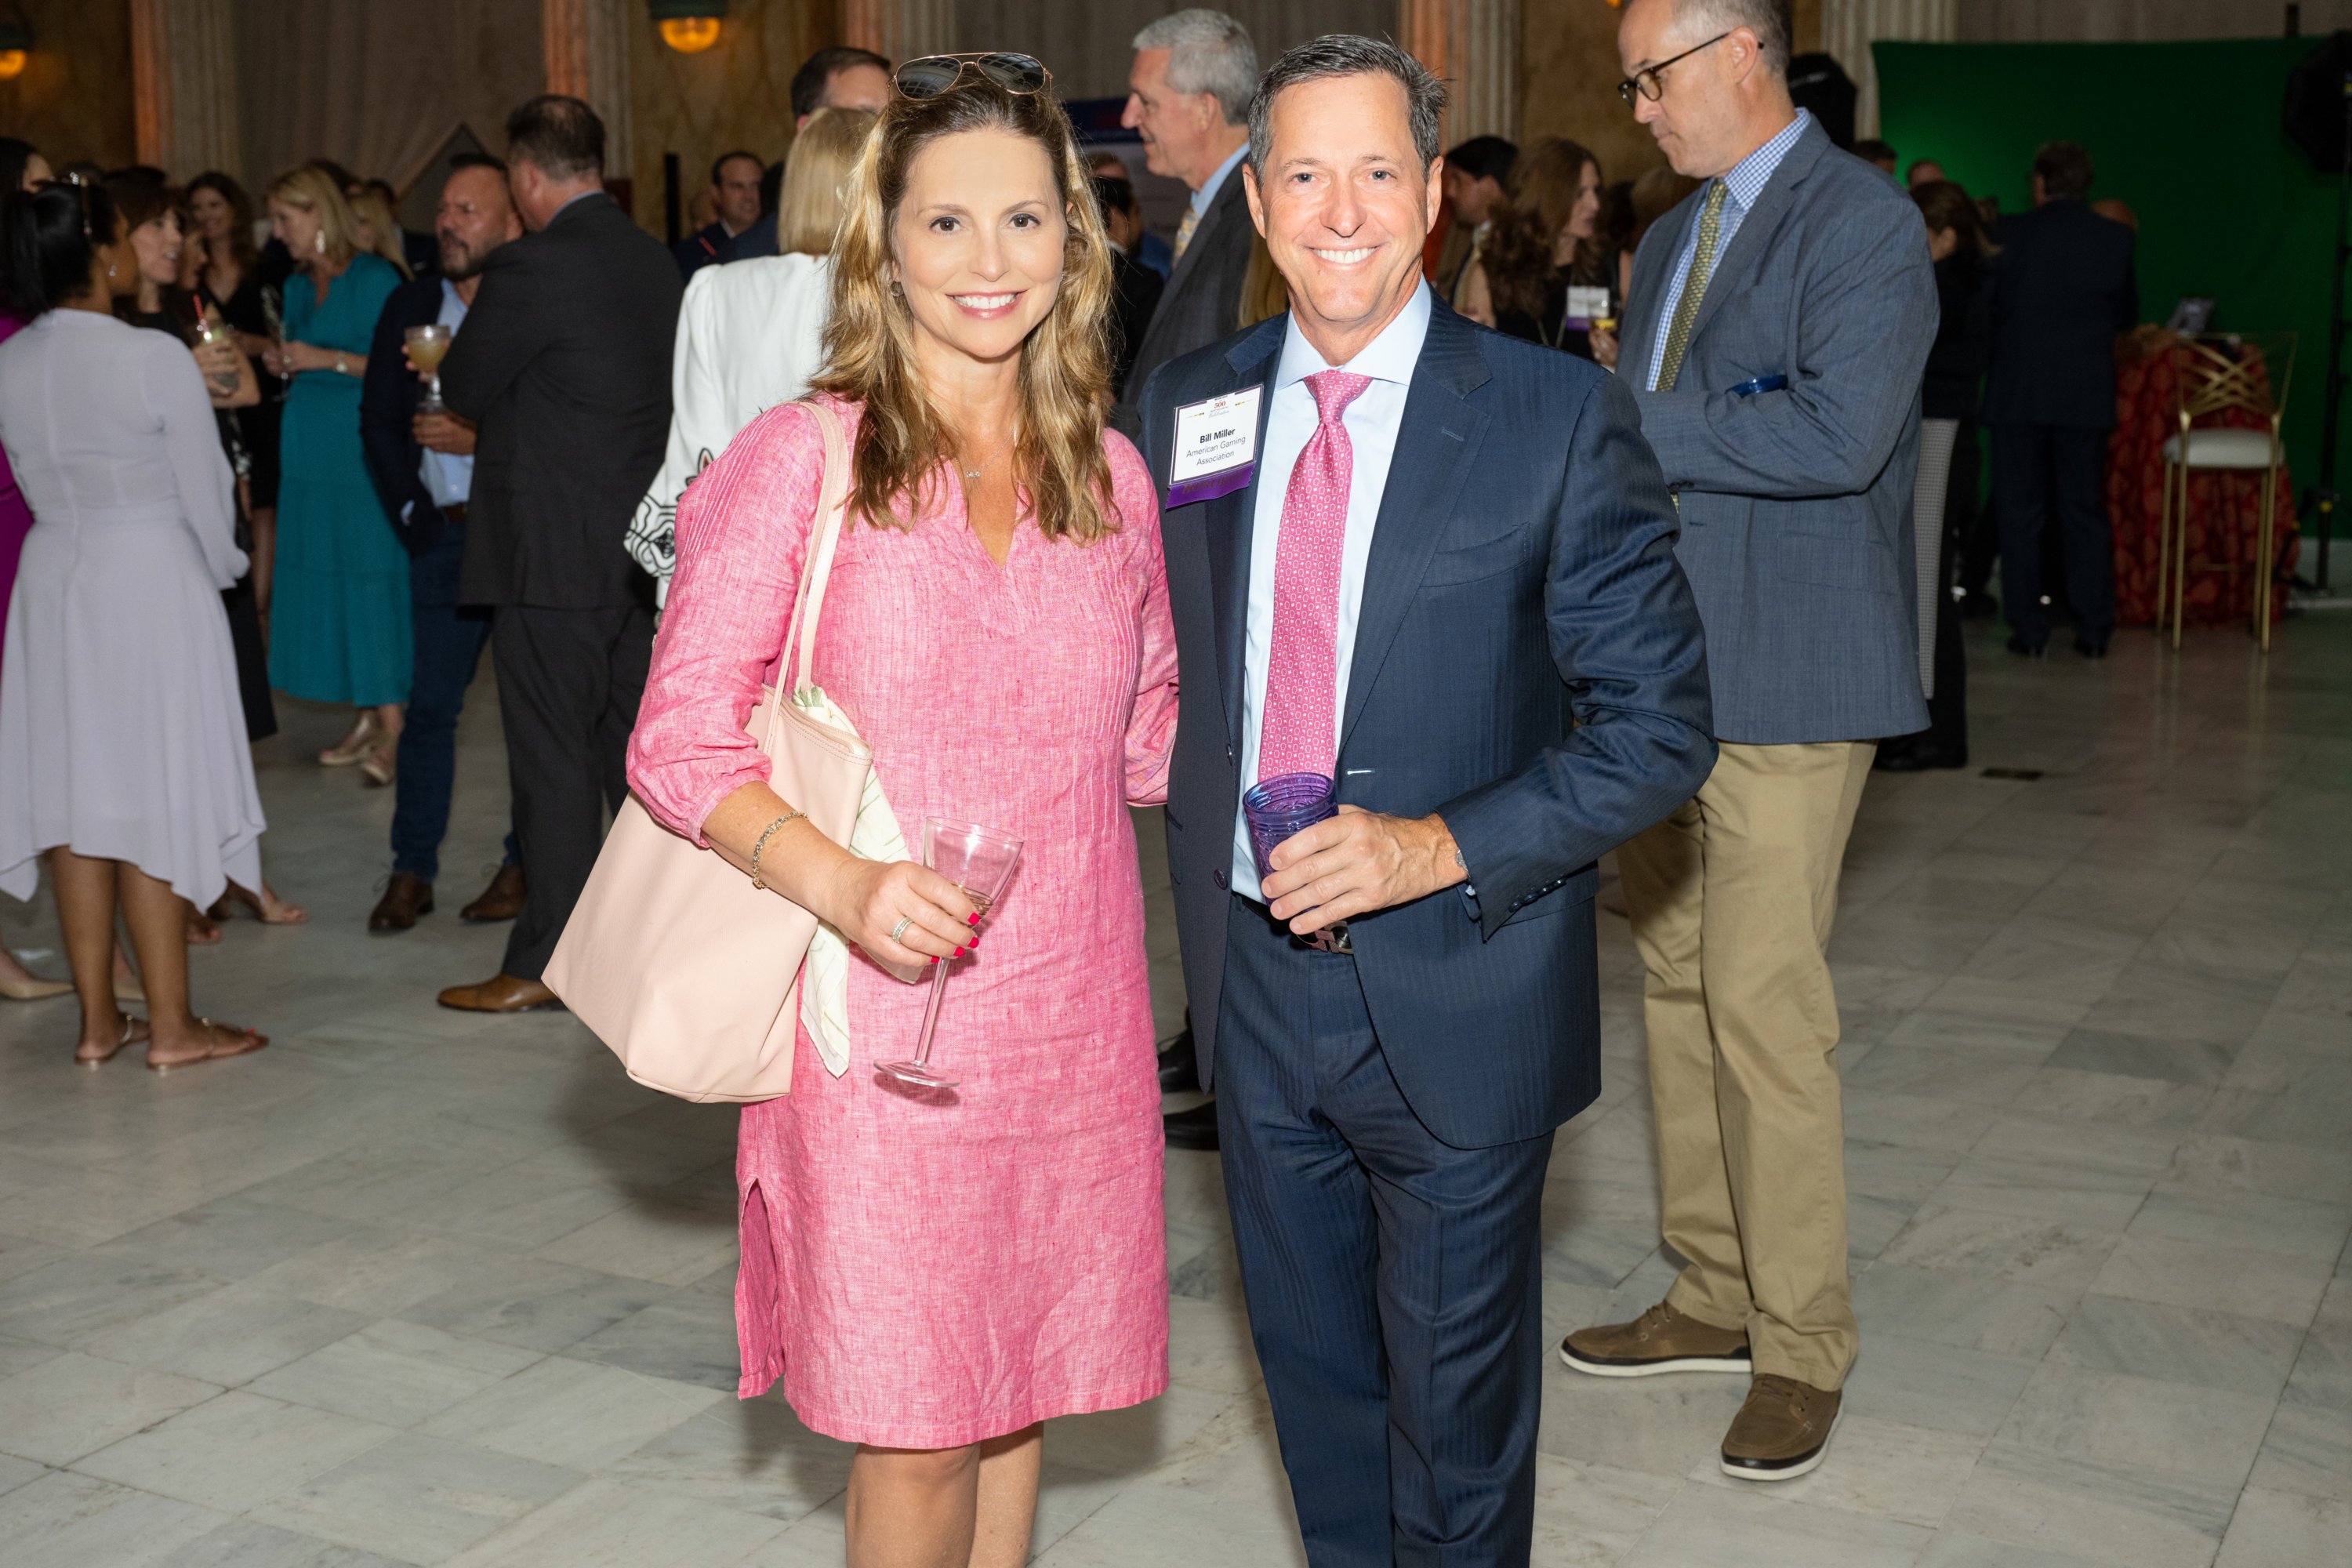 Michelle Russo and Bill Miller at Washingtonian's 500 Most Influential Celebration